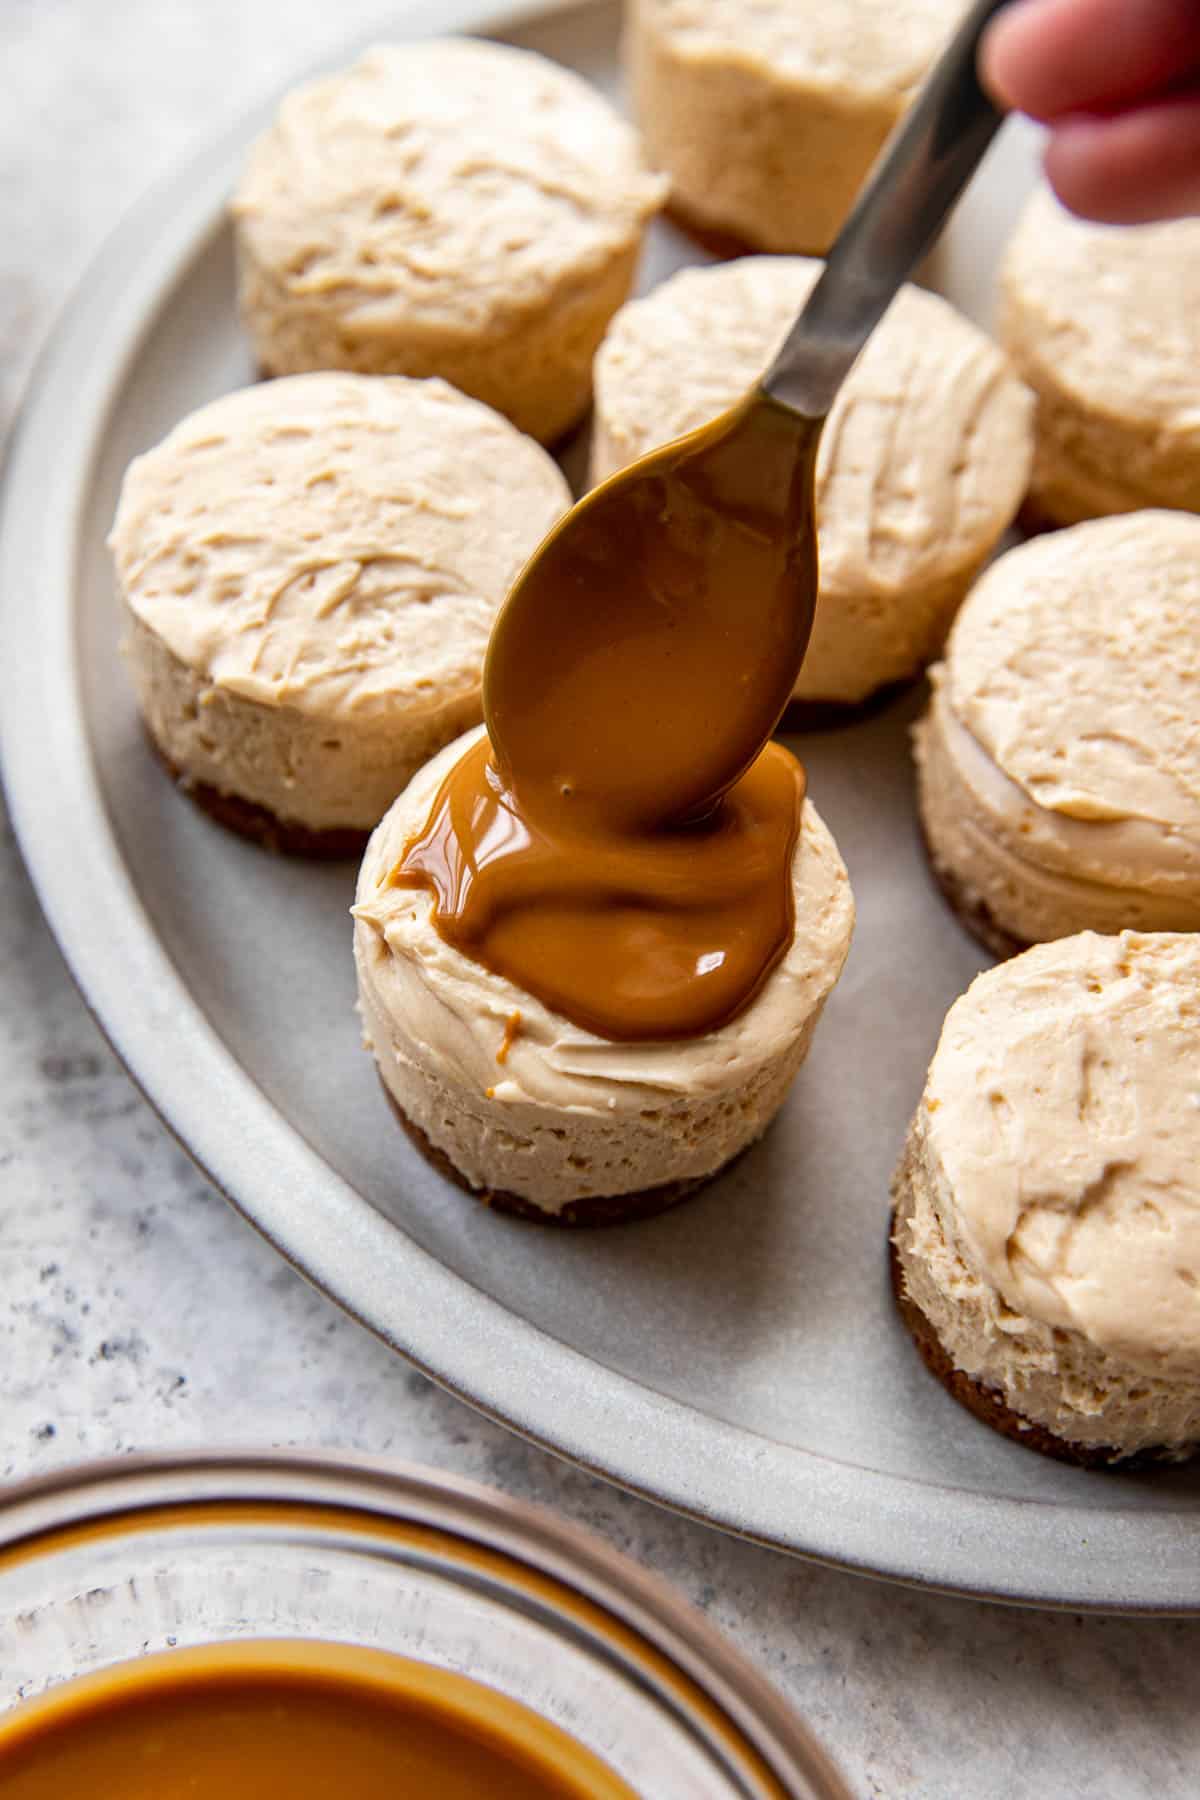 cookie butter being spooned onto cheesecake.